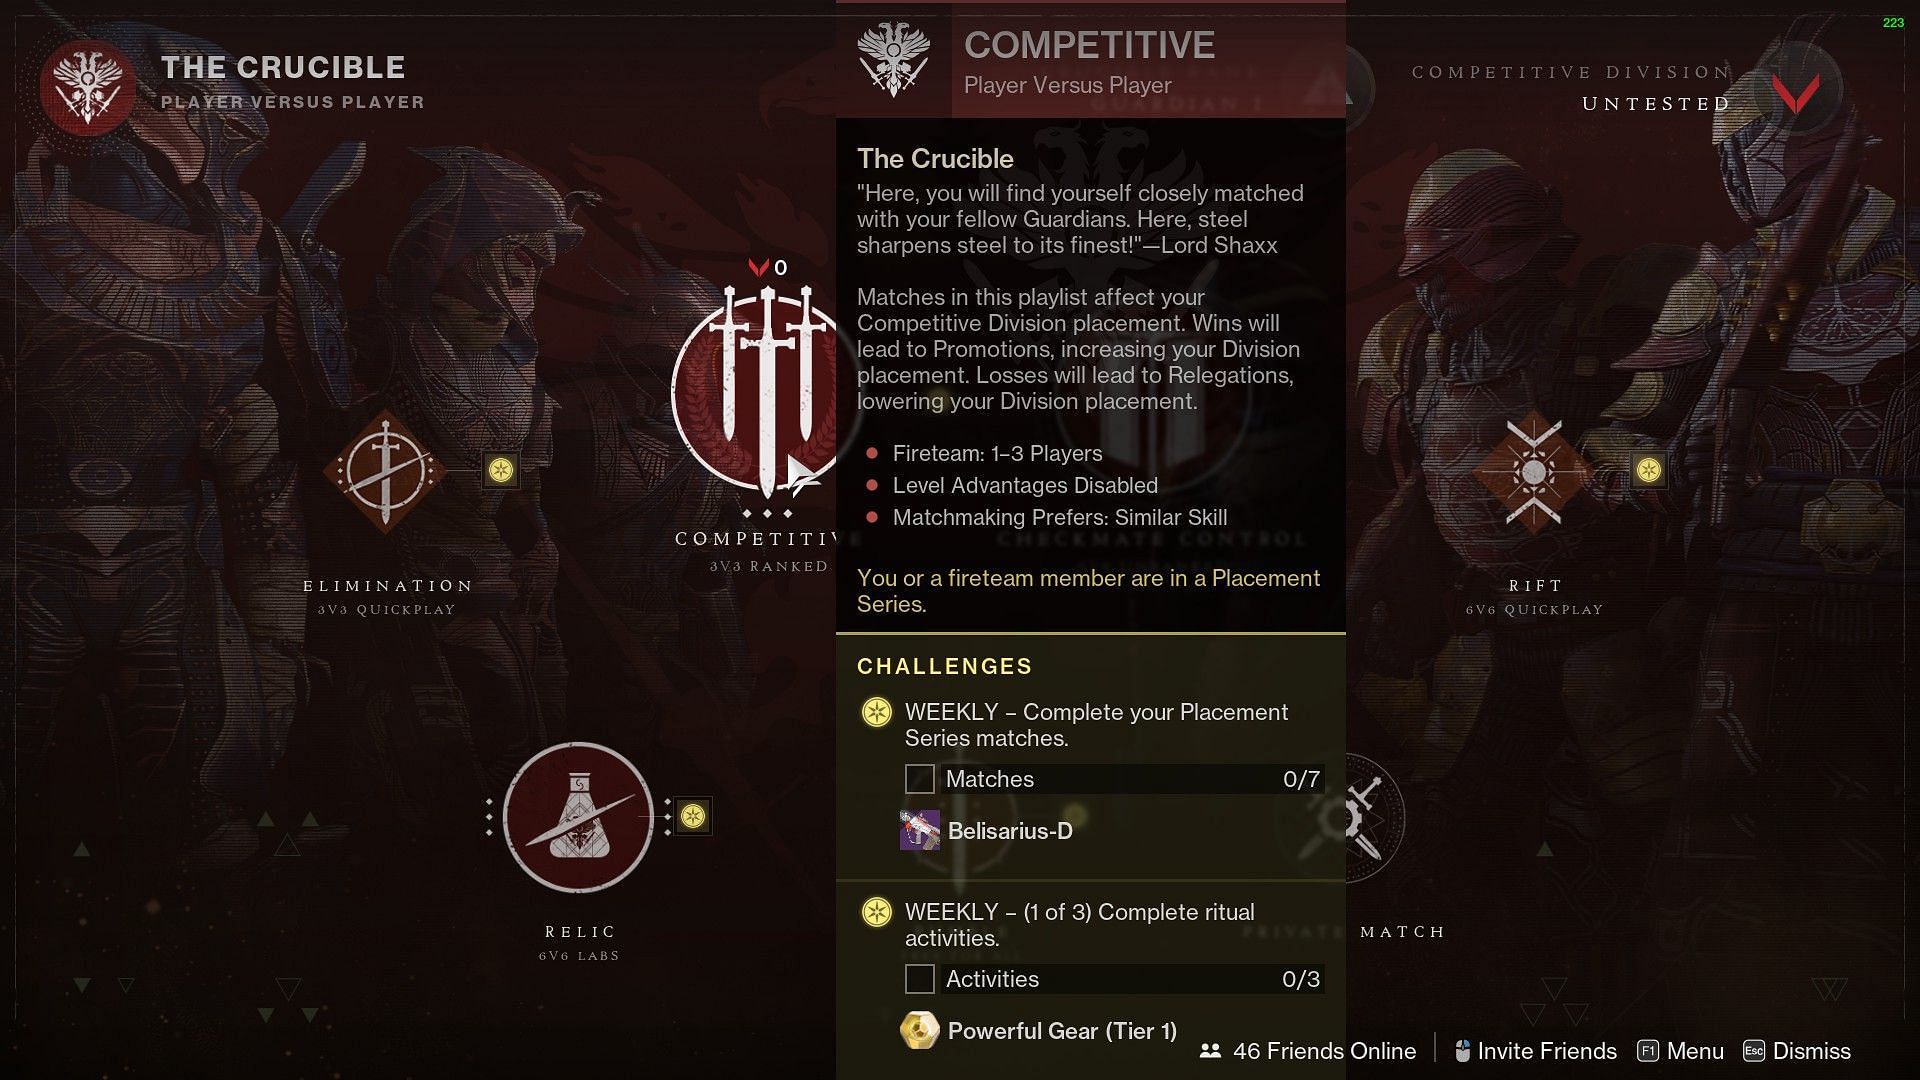 Competitive game mode in Destiny 2 (Image via Bungie)